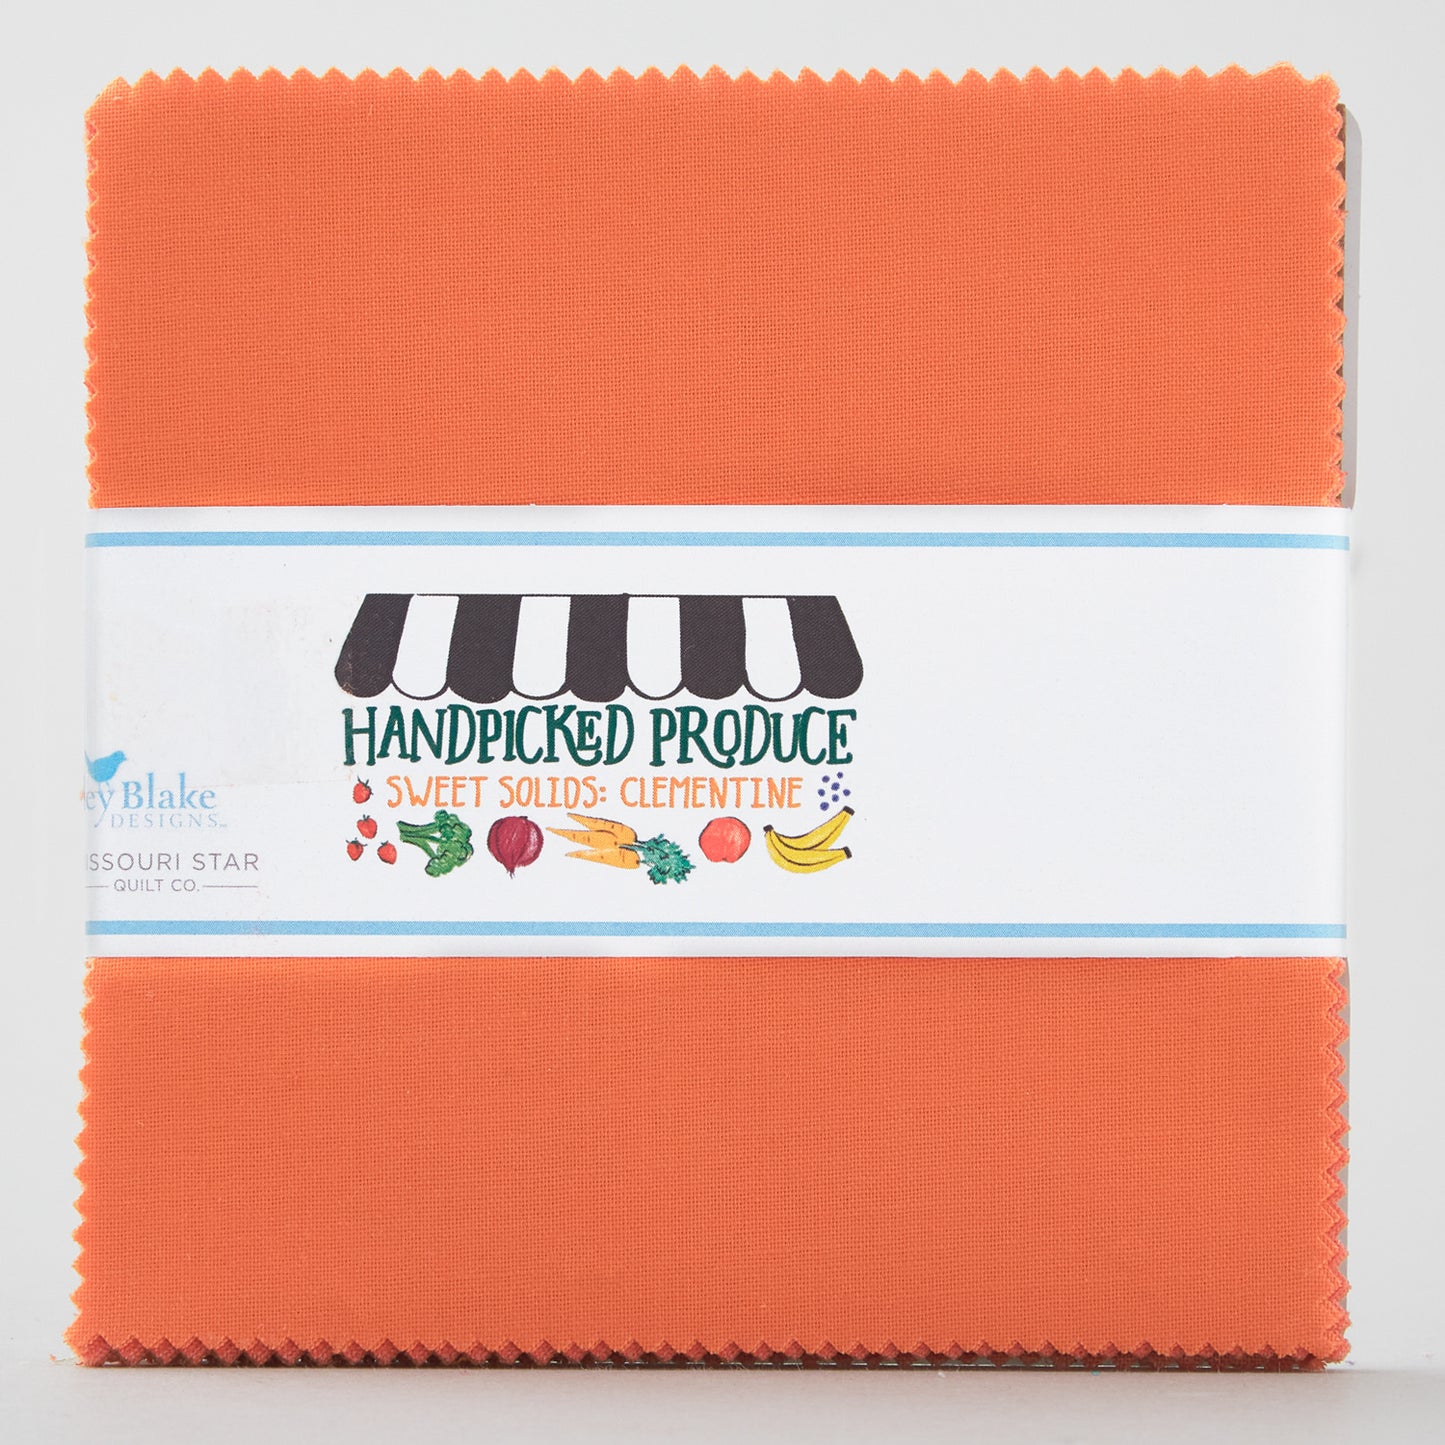 Handpicked Produce - Sweet Solids Clementine 5" Stackers 20 pcs. Alternative View #1